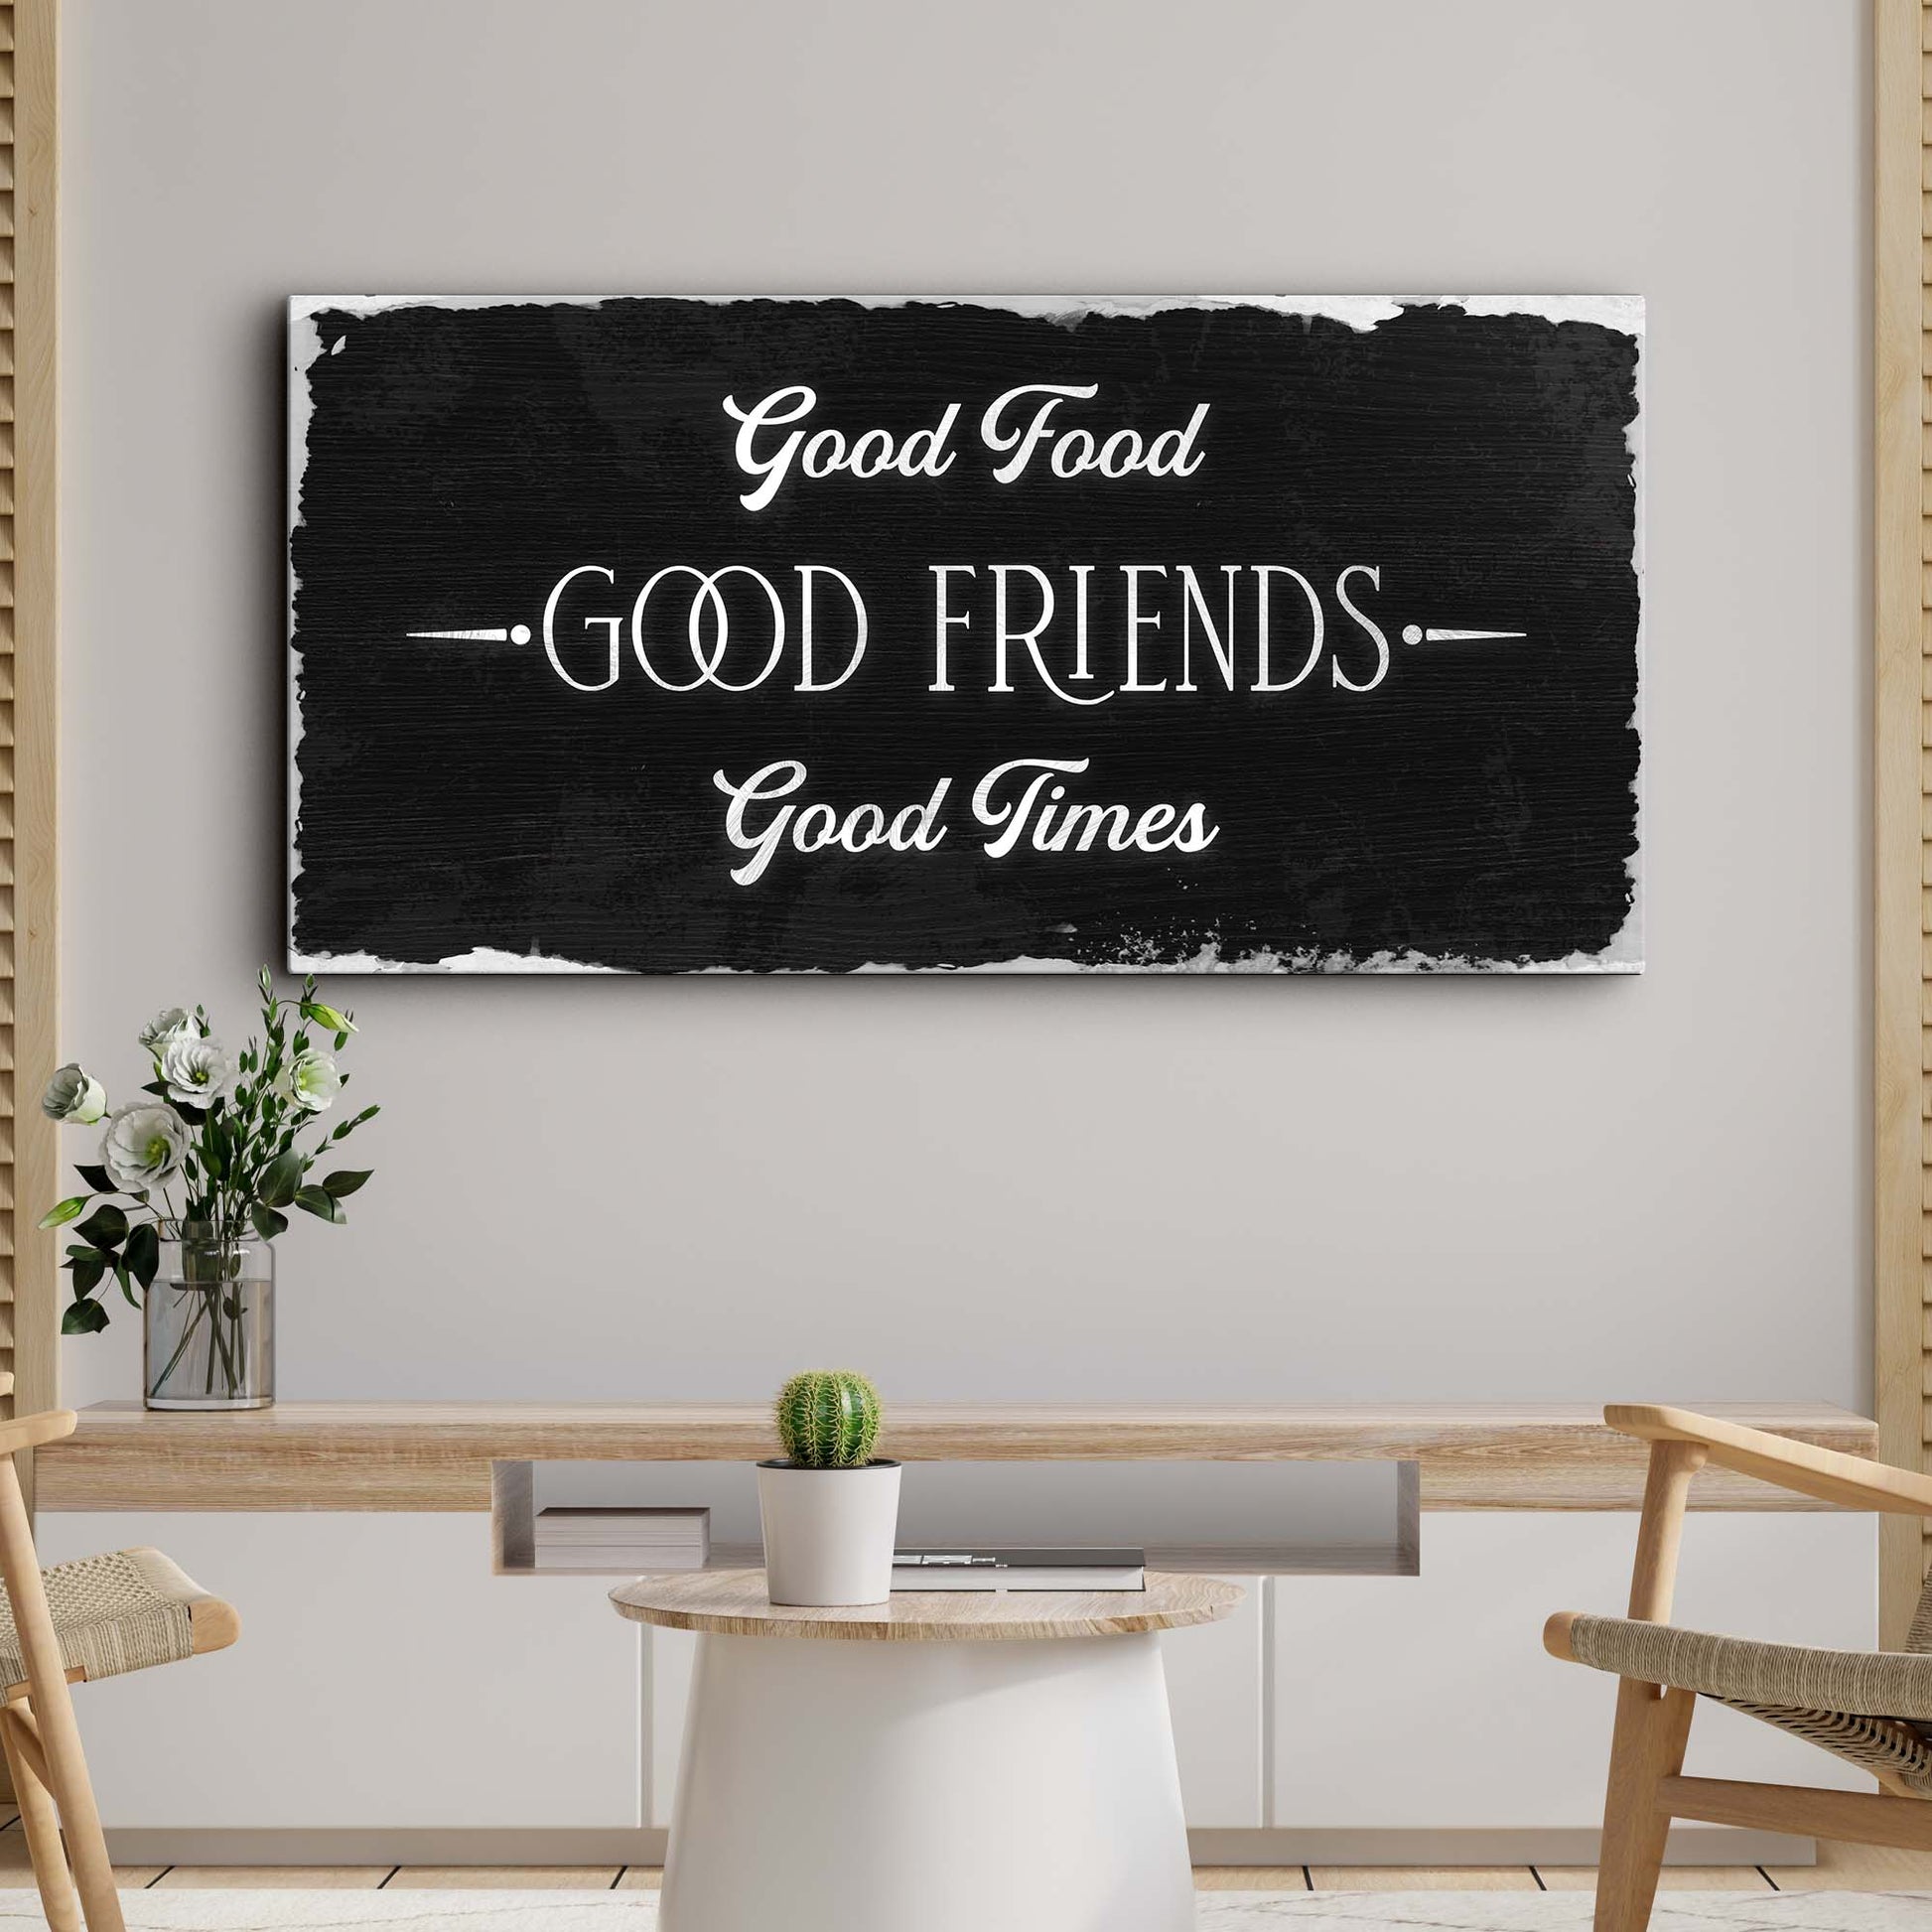 Good Food Good Friends Good Times Sign III - Image by Tailored Canvases